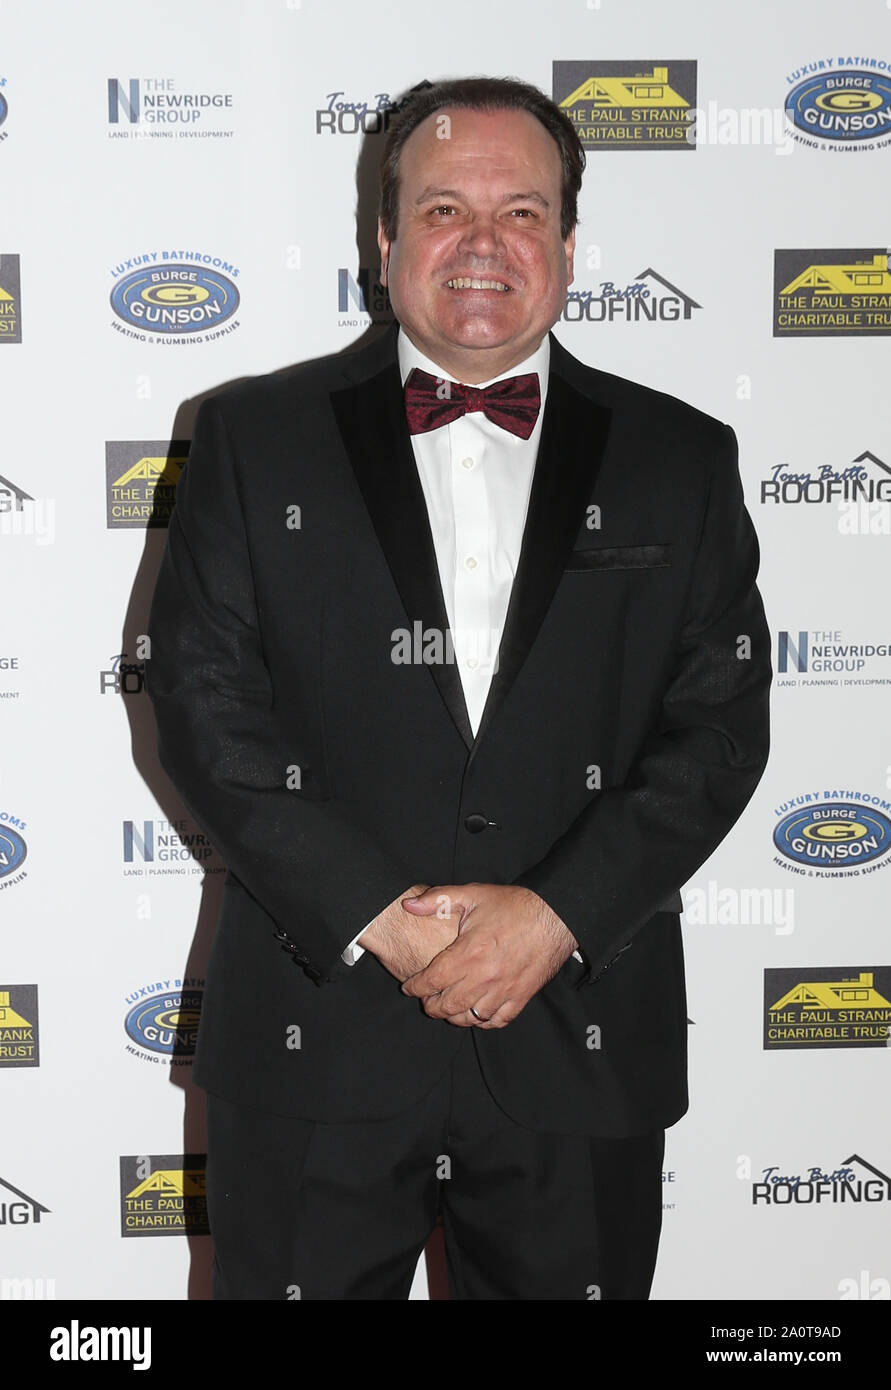 Shaun Williamson attends the PSR Charity Gala Ball for Shooting Stars Charity, at the Bank of England's Sport Ground, London. Stock Photo